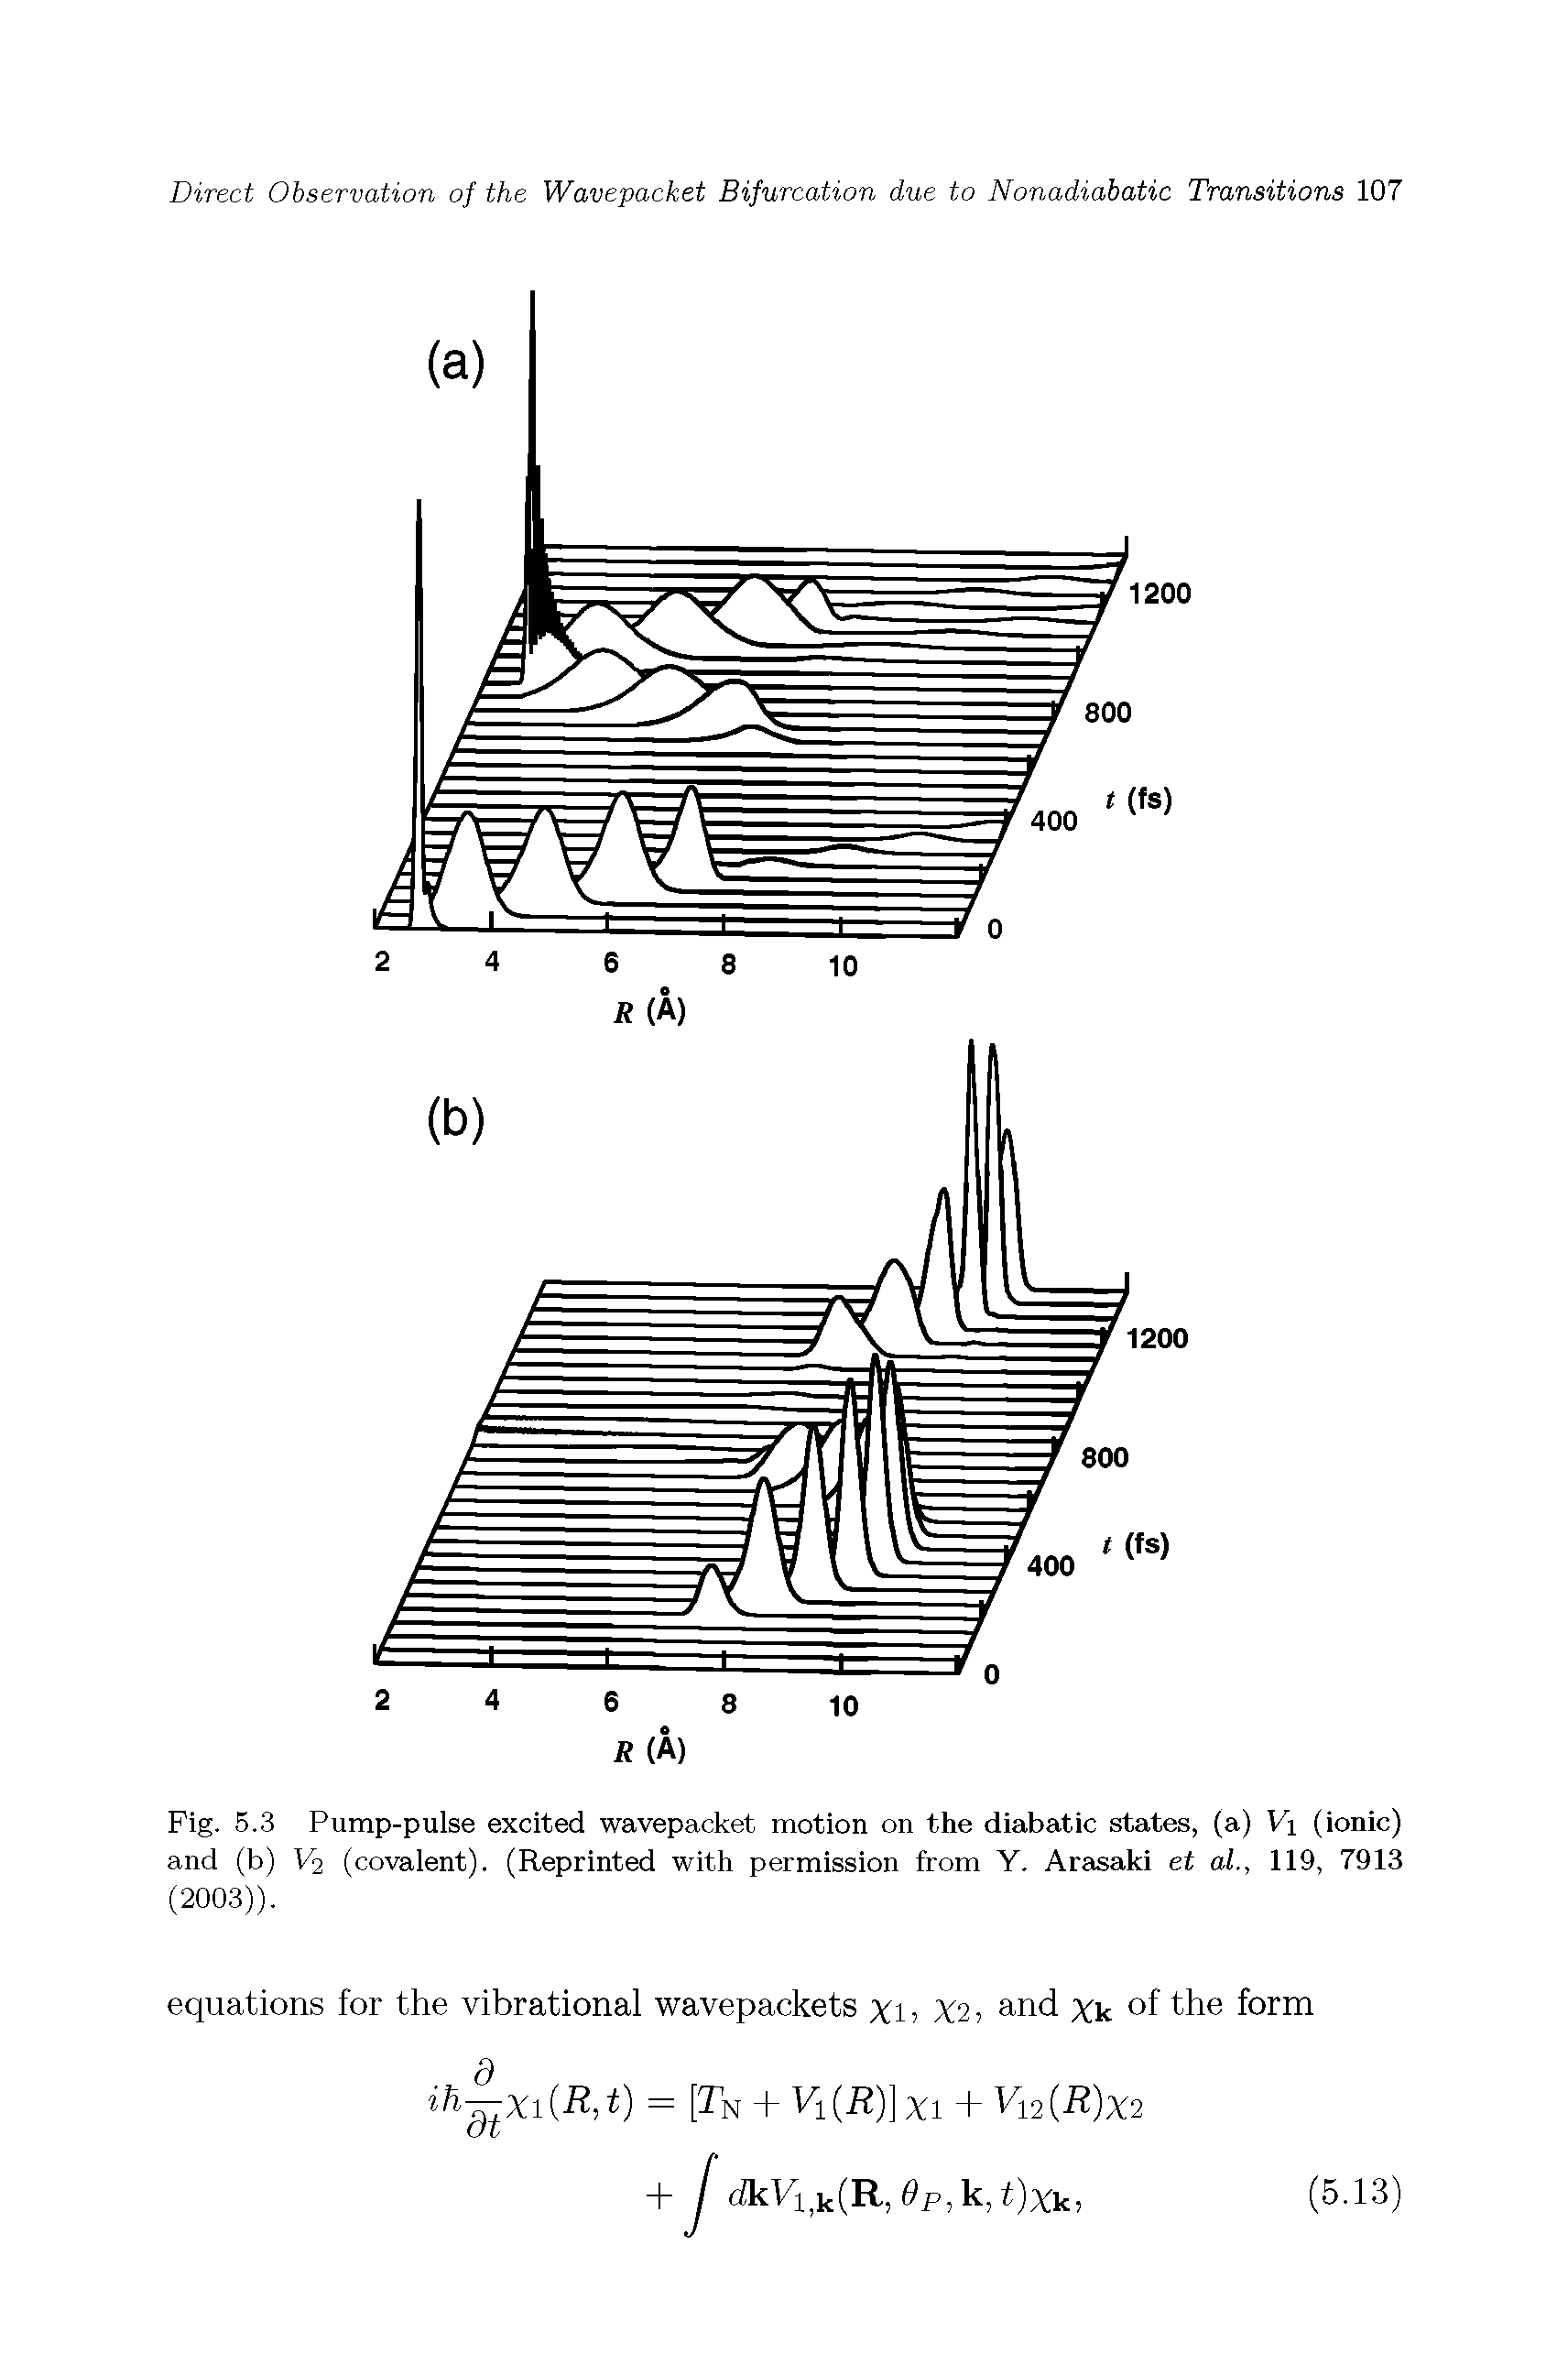 Fig. 5.3 Pump-pulse excited wavepacket motion on the diabatic states, (a) Vj (ionic) and (b) V2 (covalent). (Reprinted with permission from Y. Arasaki et al, 119, 7913 (2003)).